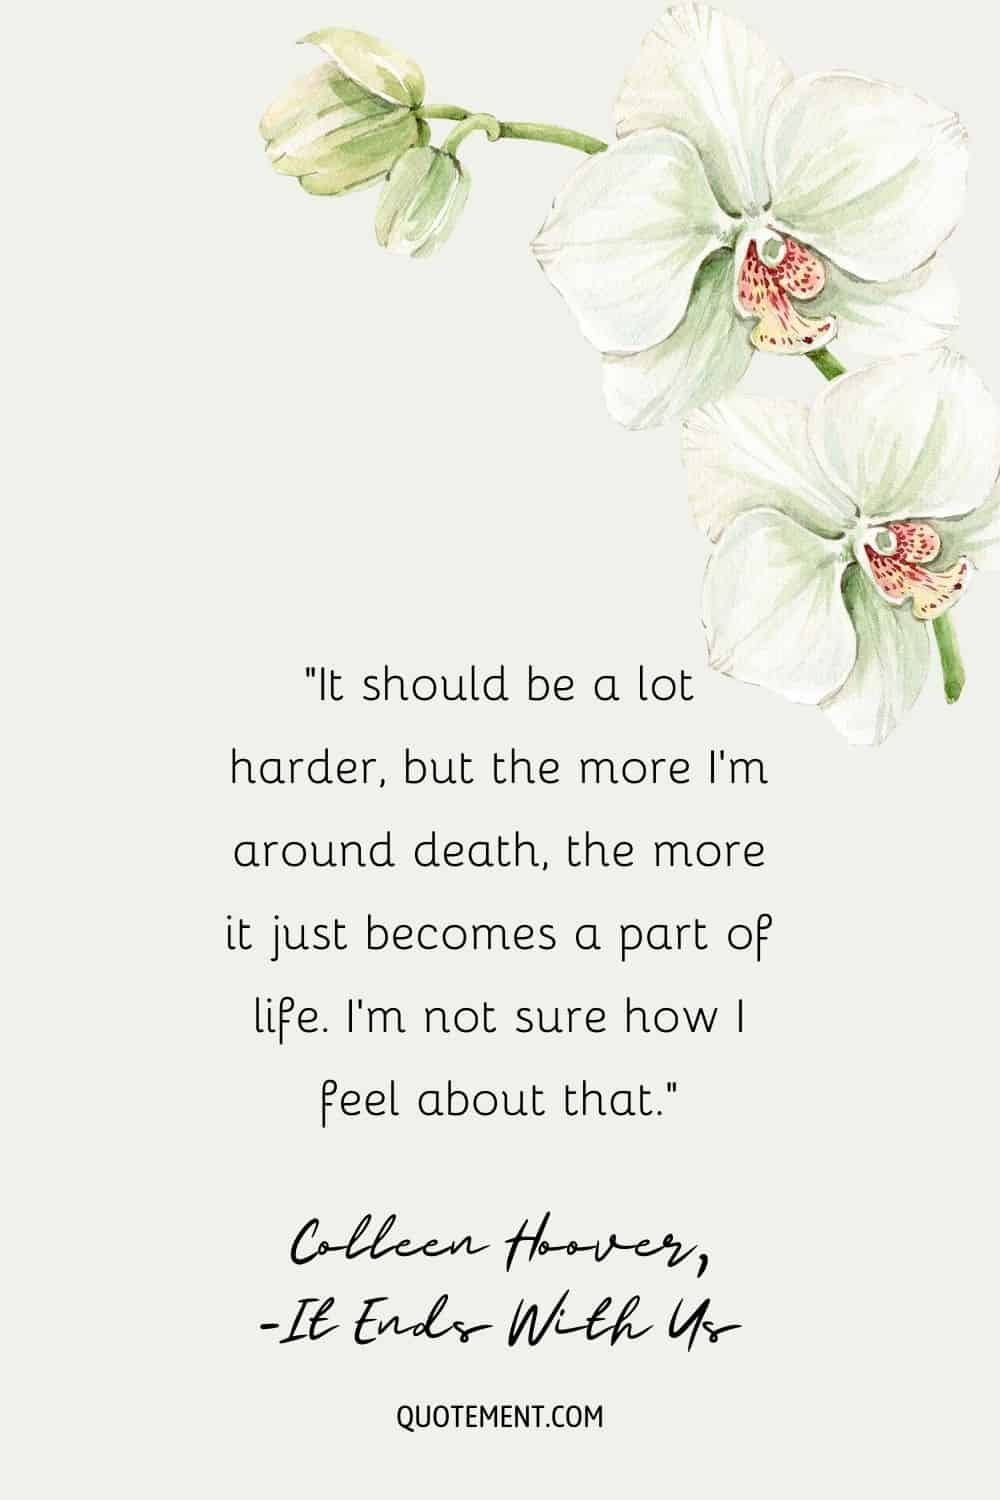 Colleen Hoover's quote on death represented by white flowers illustration.
